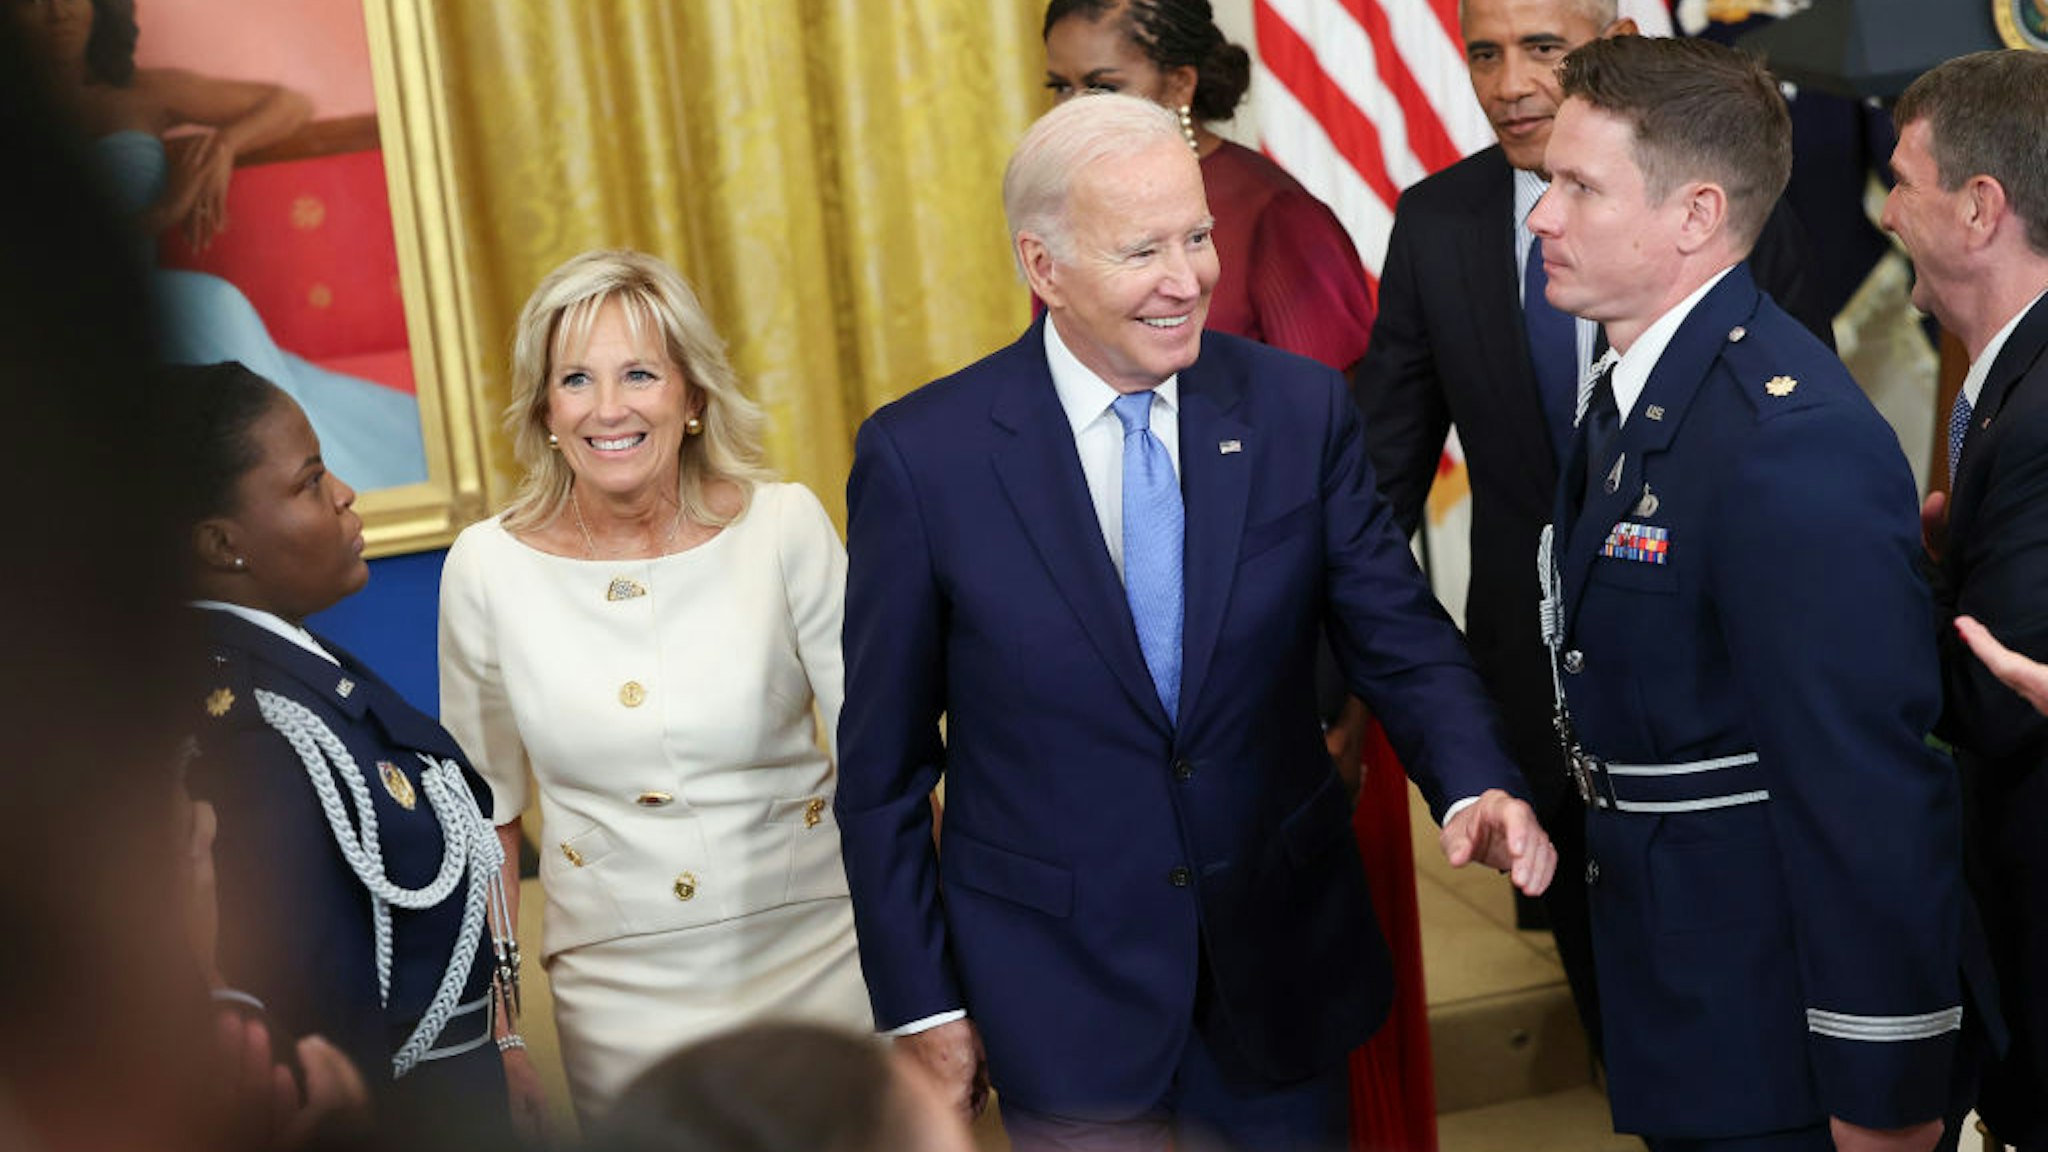 WASHINGTON, DC - SEPTEMBER 07: (L-R) U.S. first lady Jill Biden, U.S. President Joe Biden, former first lady Michell Obama, and former U.S. President Barack Obama depart following a ceremony to unveil the official Obama White House portraits September 7, 2022 in Washington, DC. The Obama’s portraits will be the first official portraits added to the White House Collection since President Obama held an unveiling ceremony for George W. Bush and Laura Bush in 2012. (Photo by Kevin Dietsch/Getty Images)